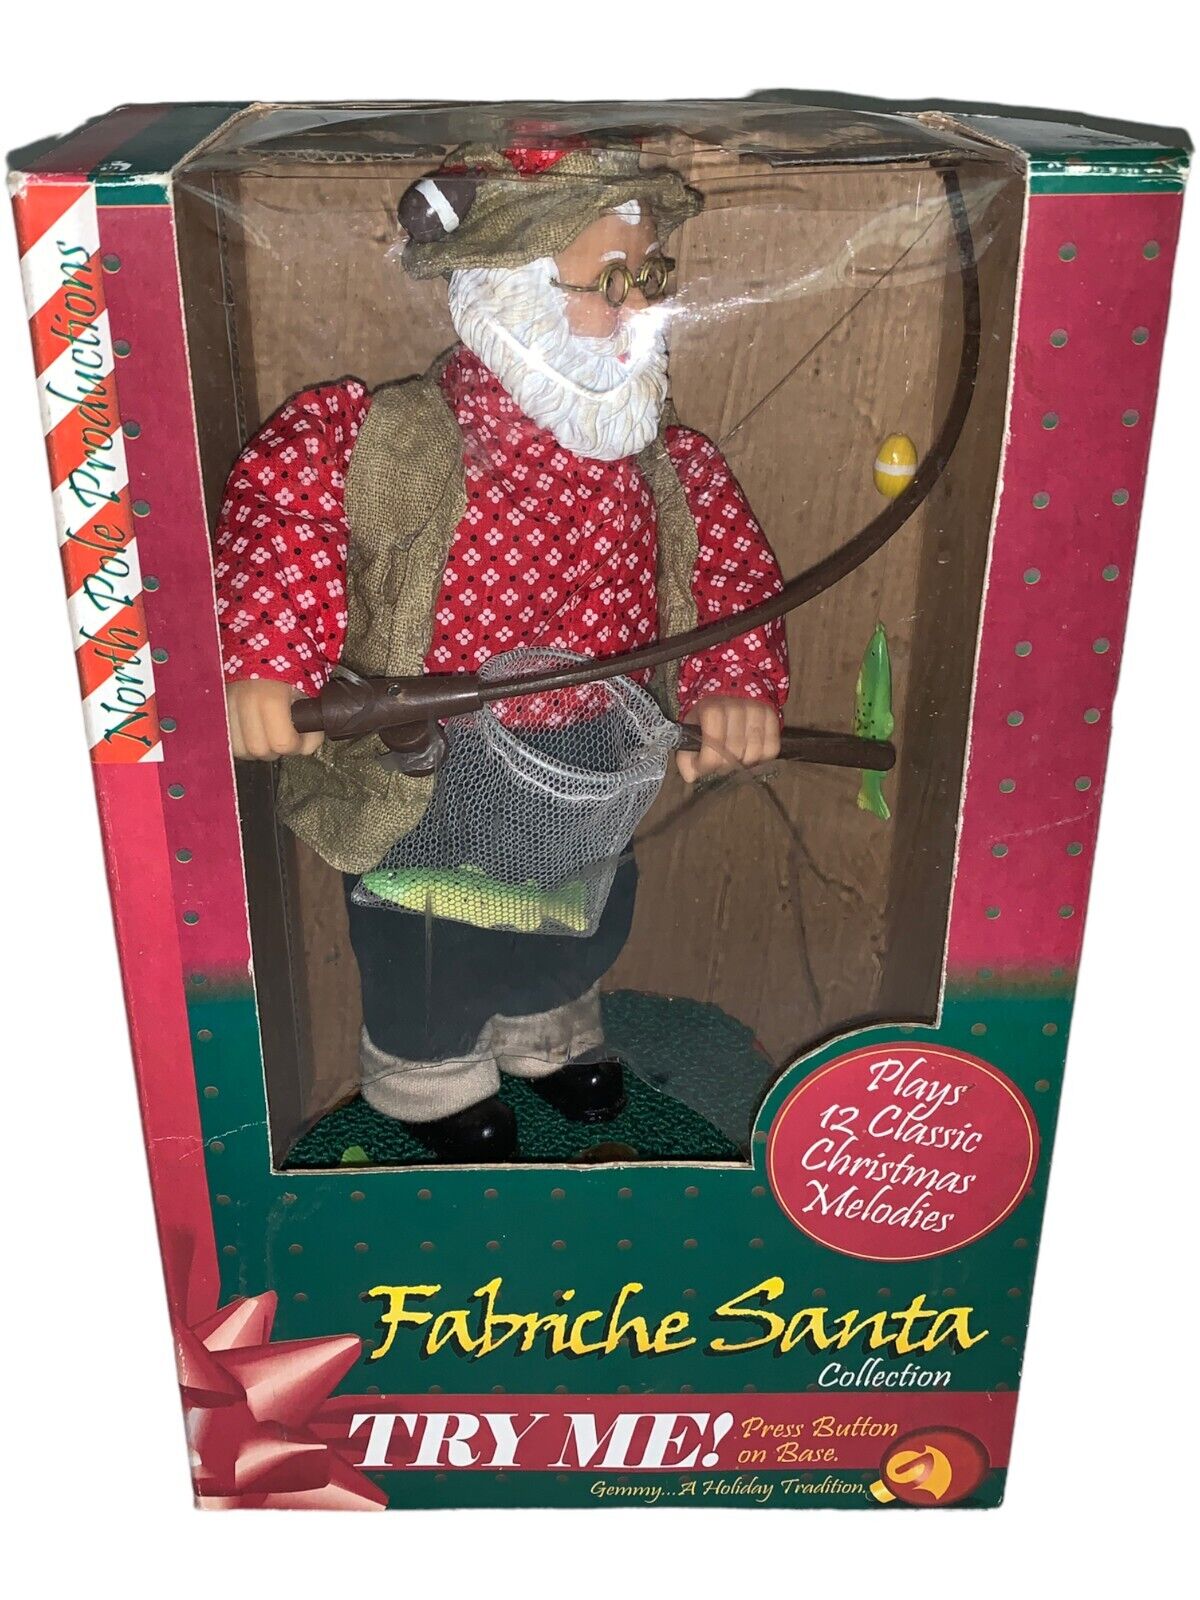 Gemmy Fishing Santa Music 12 Inches Tall With Box See Video Vintage Christmas